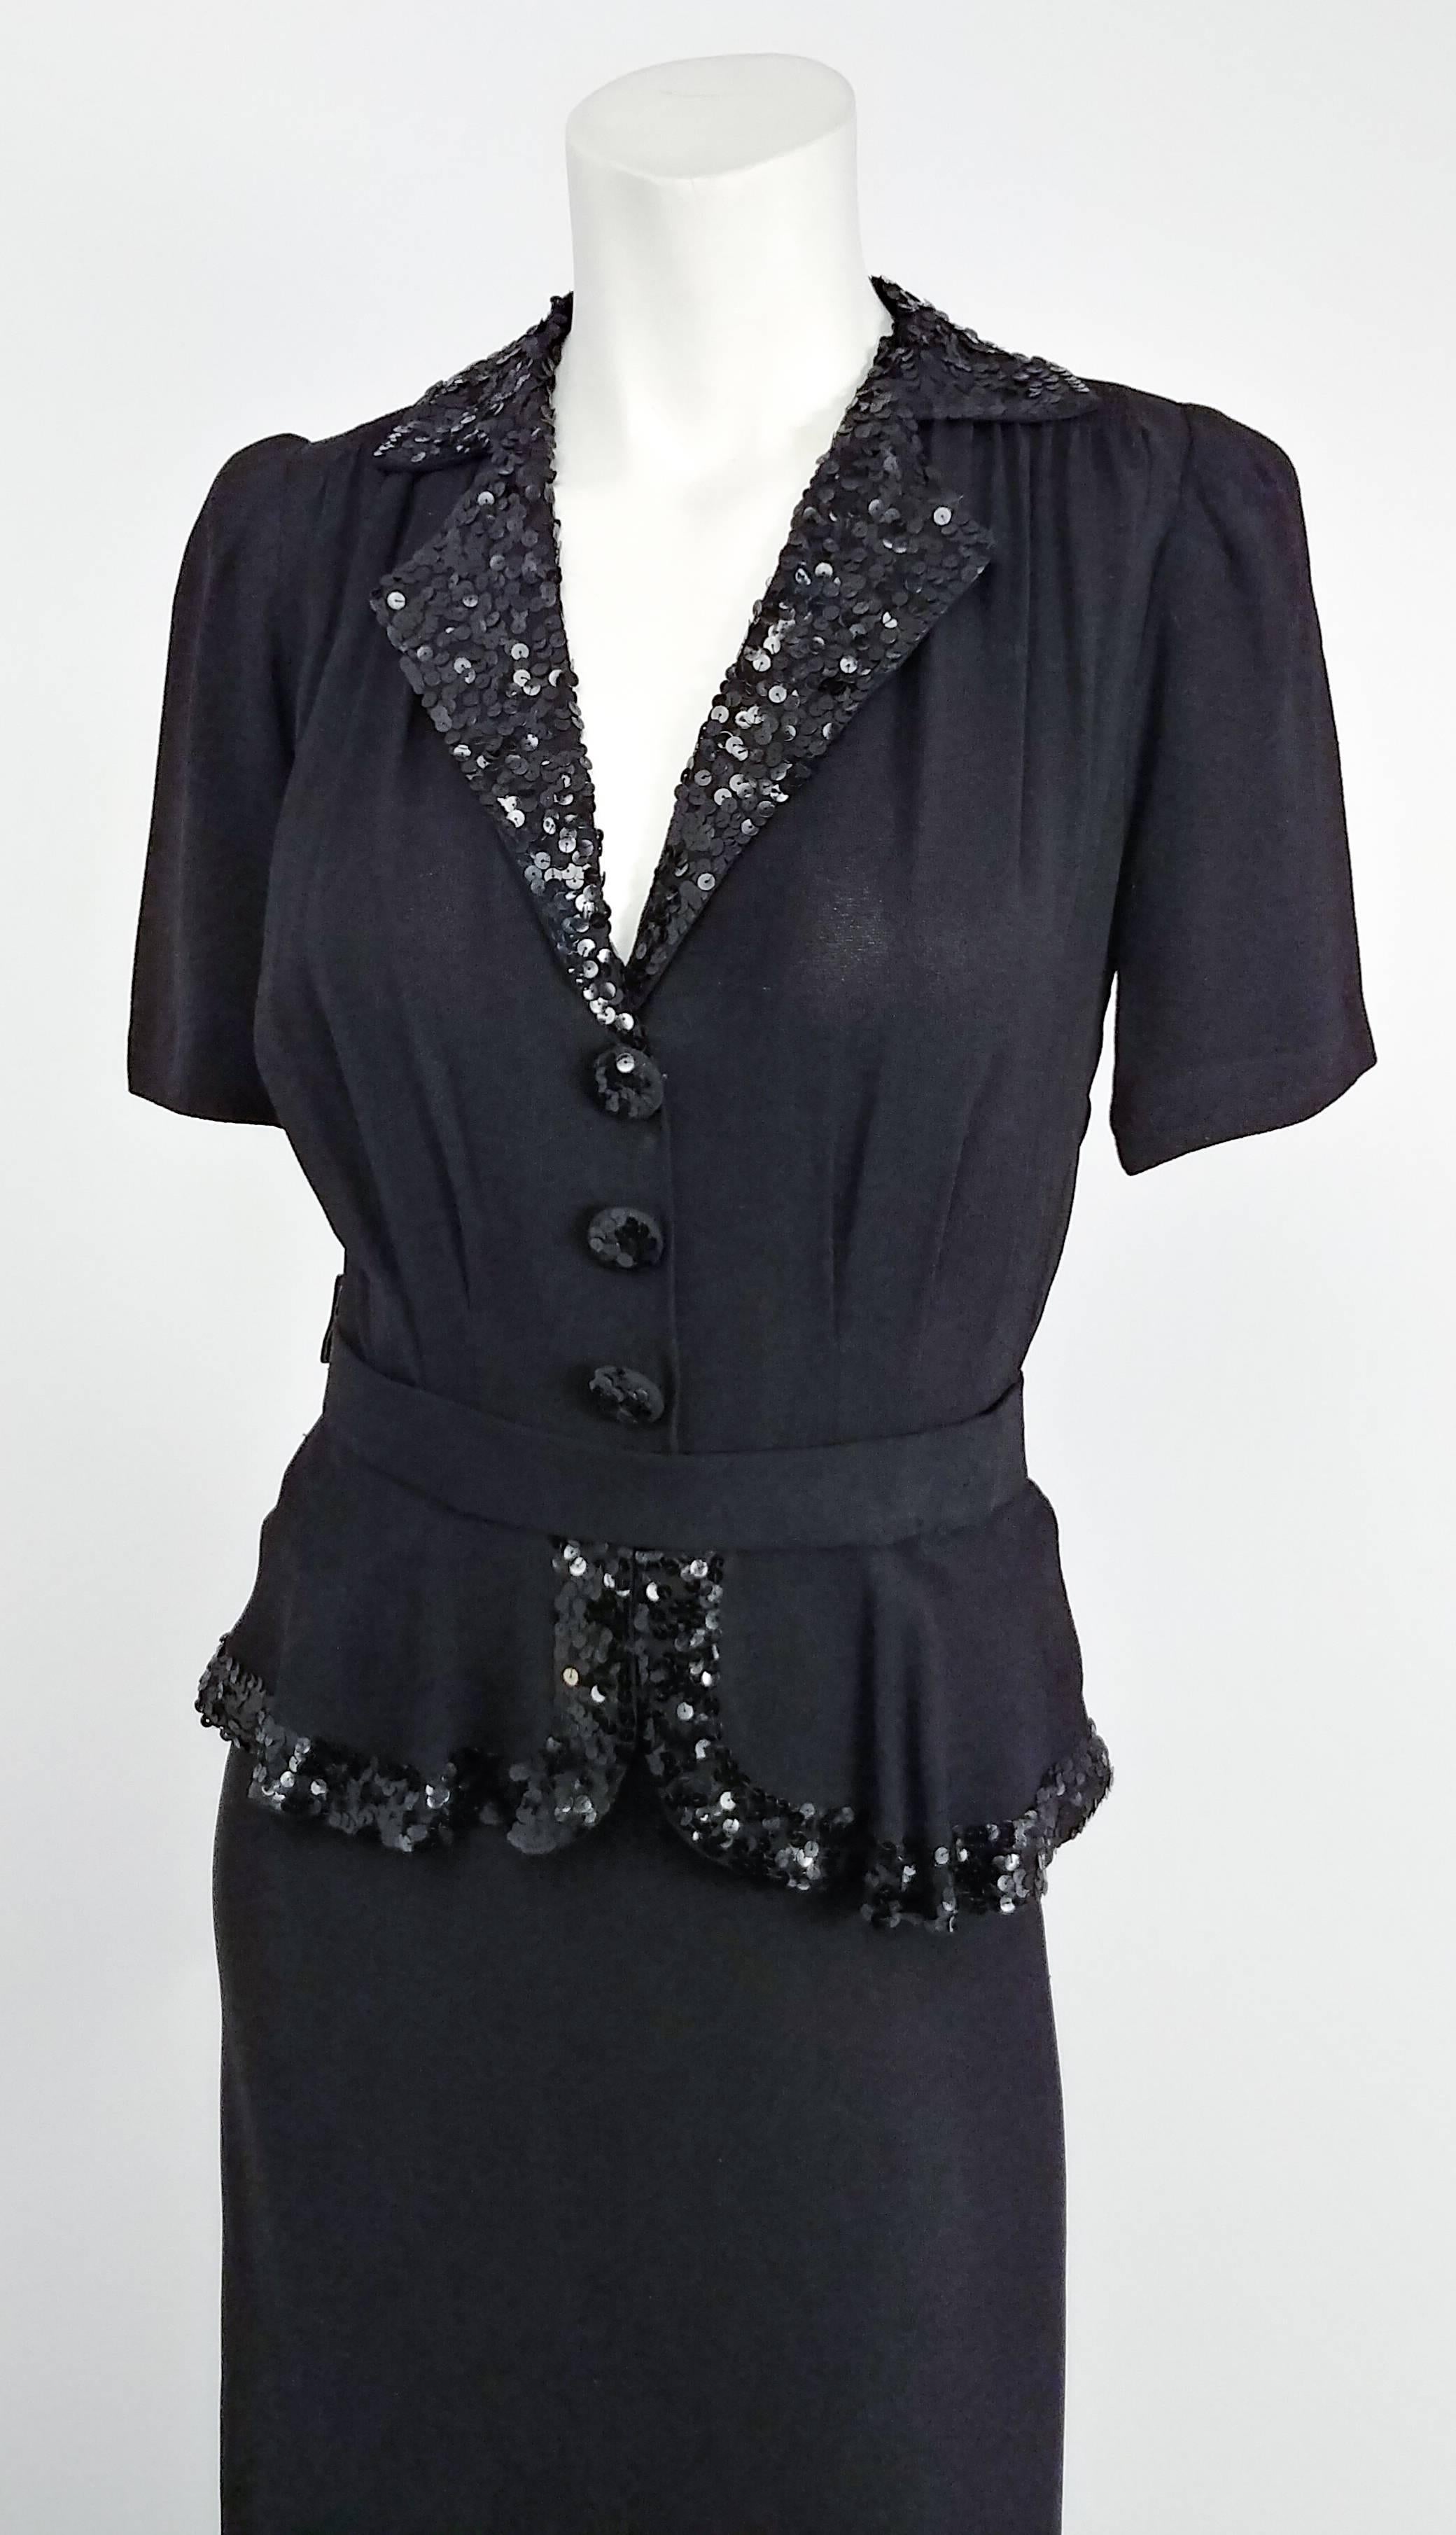 1930s Black Crepe Day Dress w/ Sequins. Comes with matching belt. Faux top/skirt look. Sequins on collar, front buttons, and peplum edge. Hook & eye closures at side, side seam of peplum snaps shut over that. Padded and gathered shoulders. 